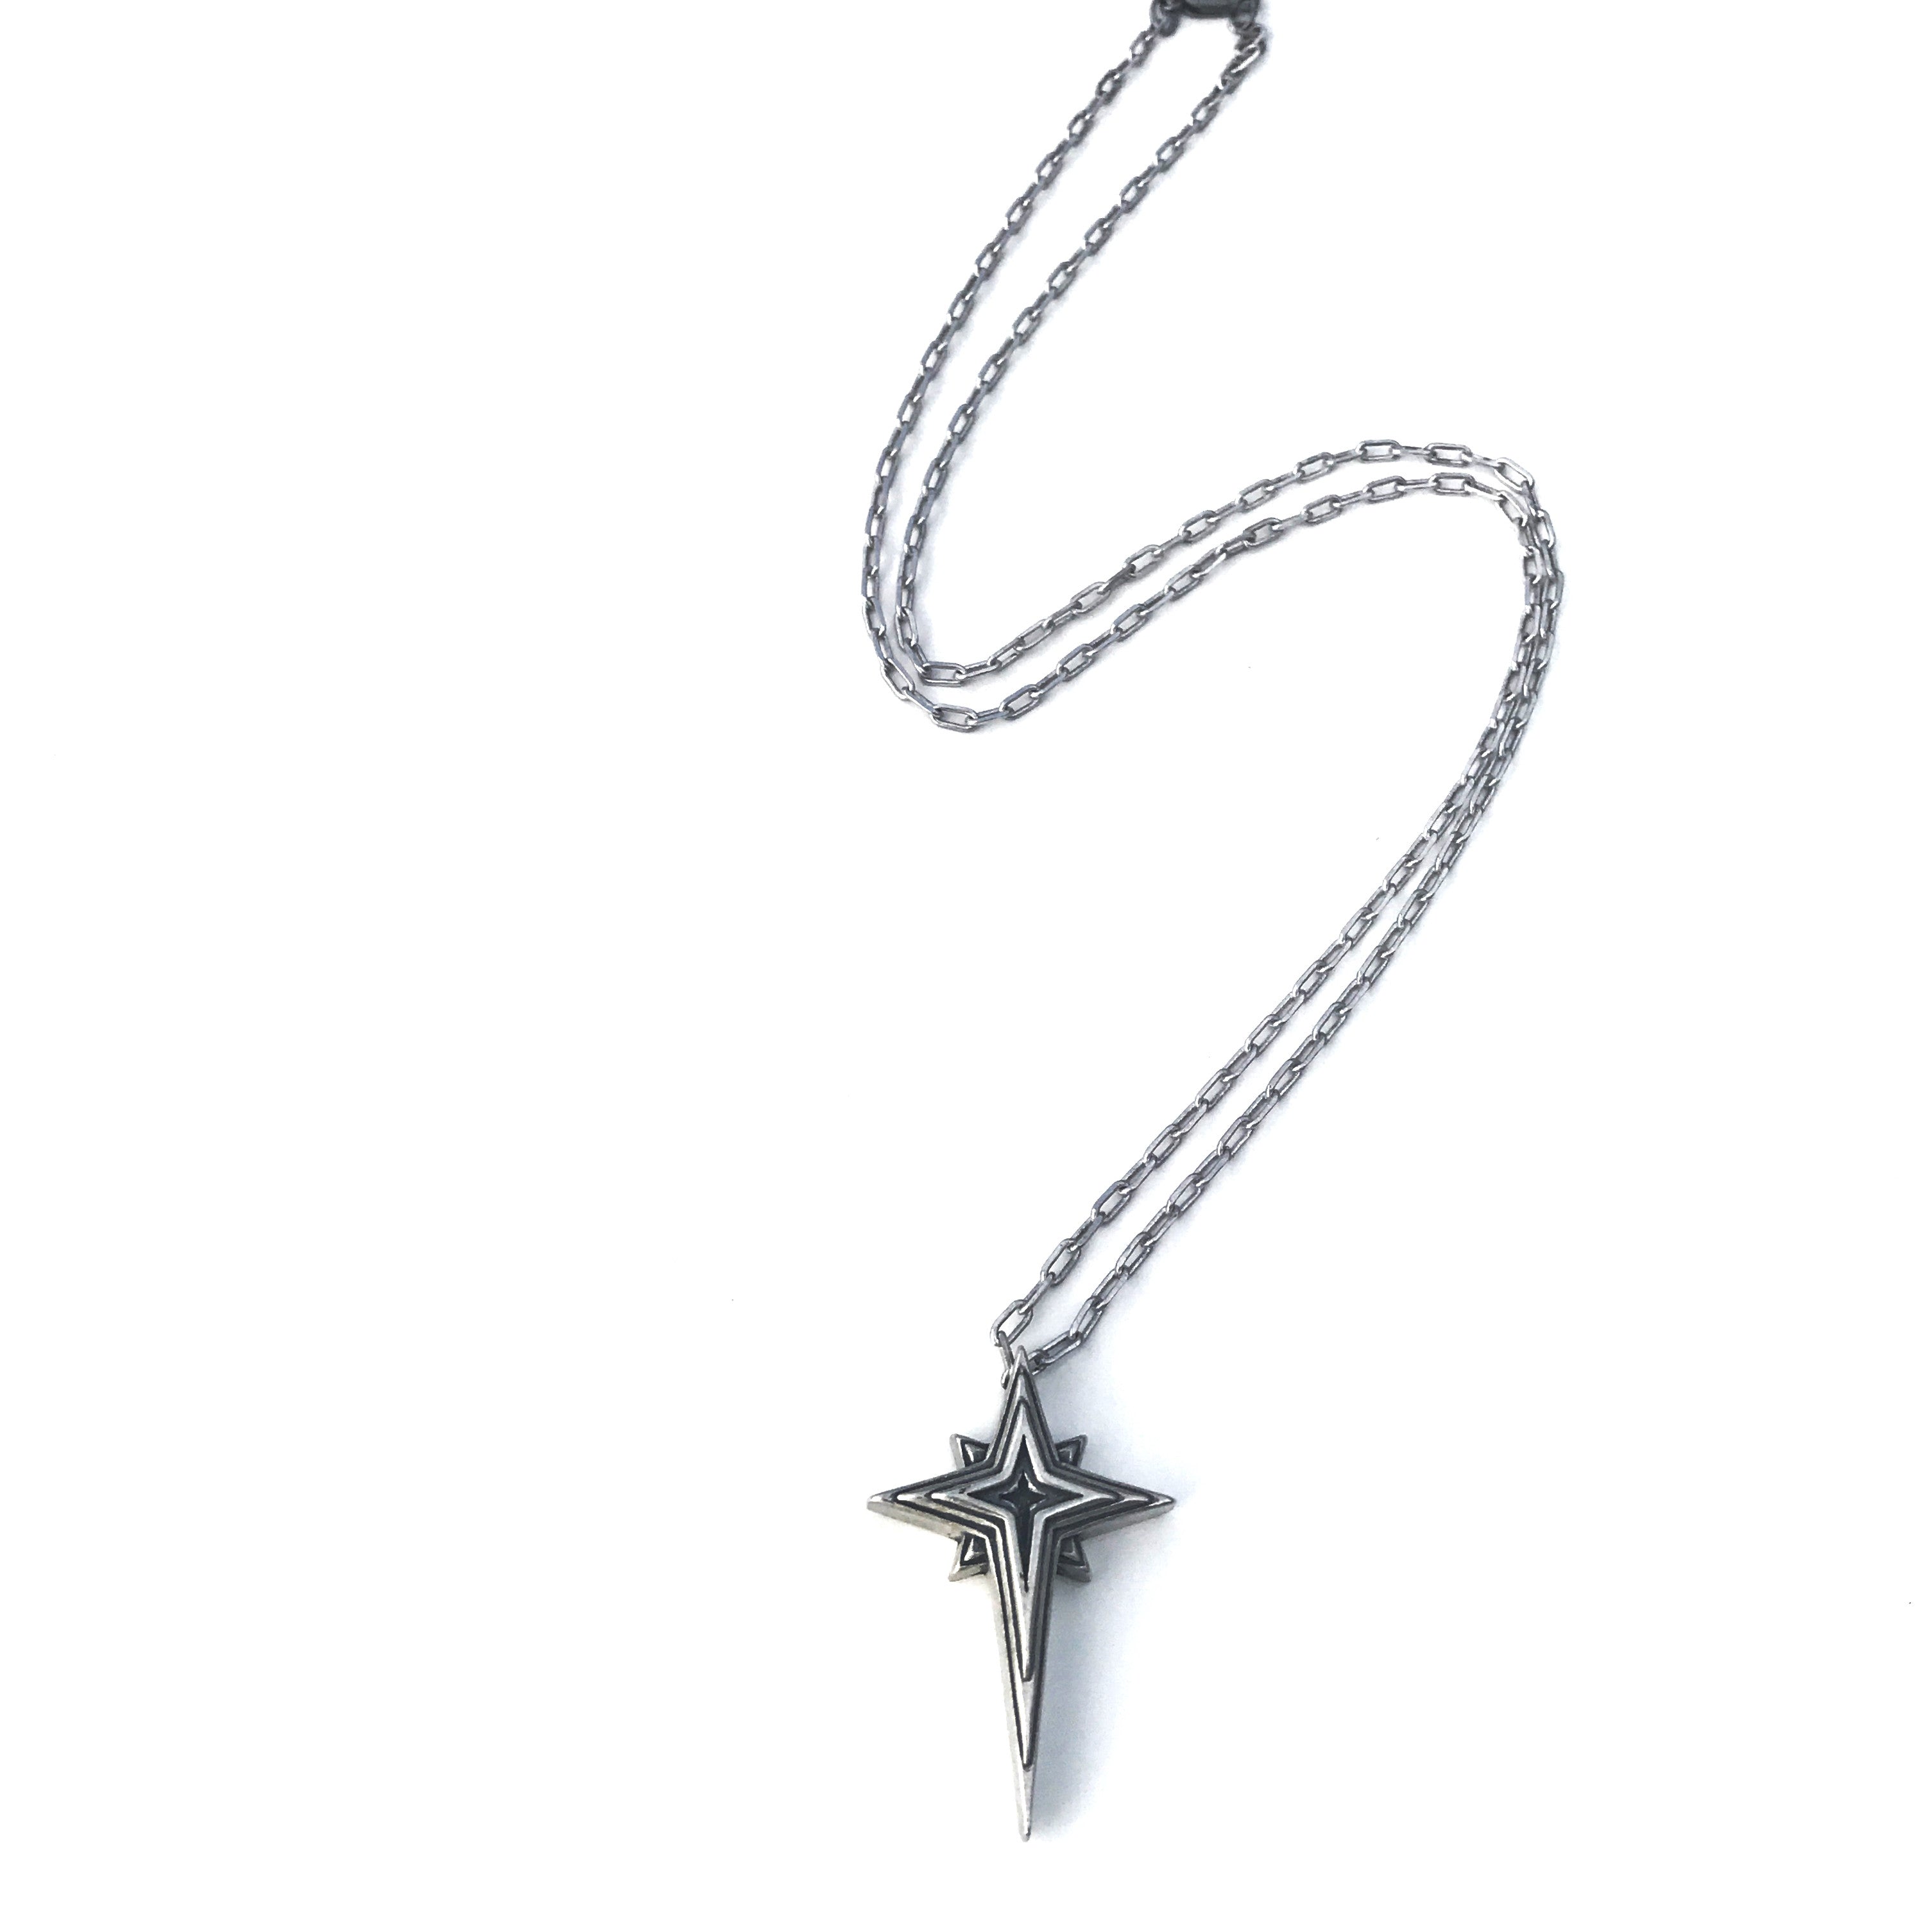 HOPE Guiding Star Necklace - Sterling Silver